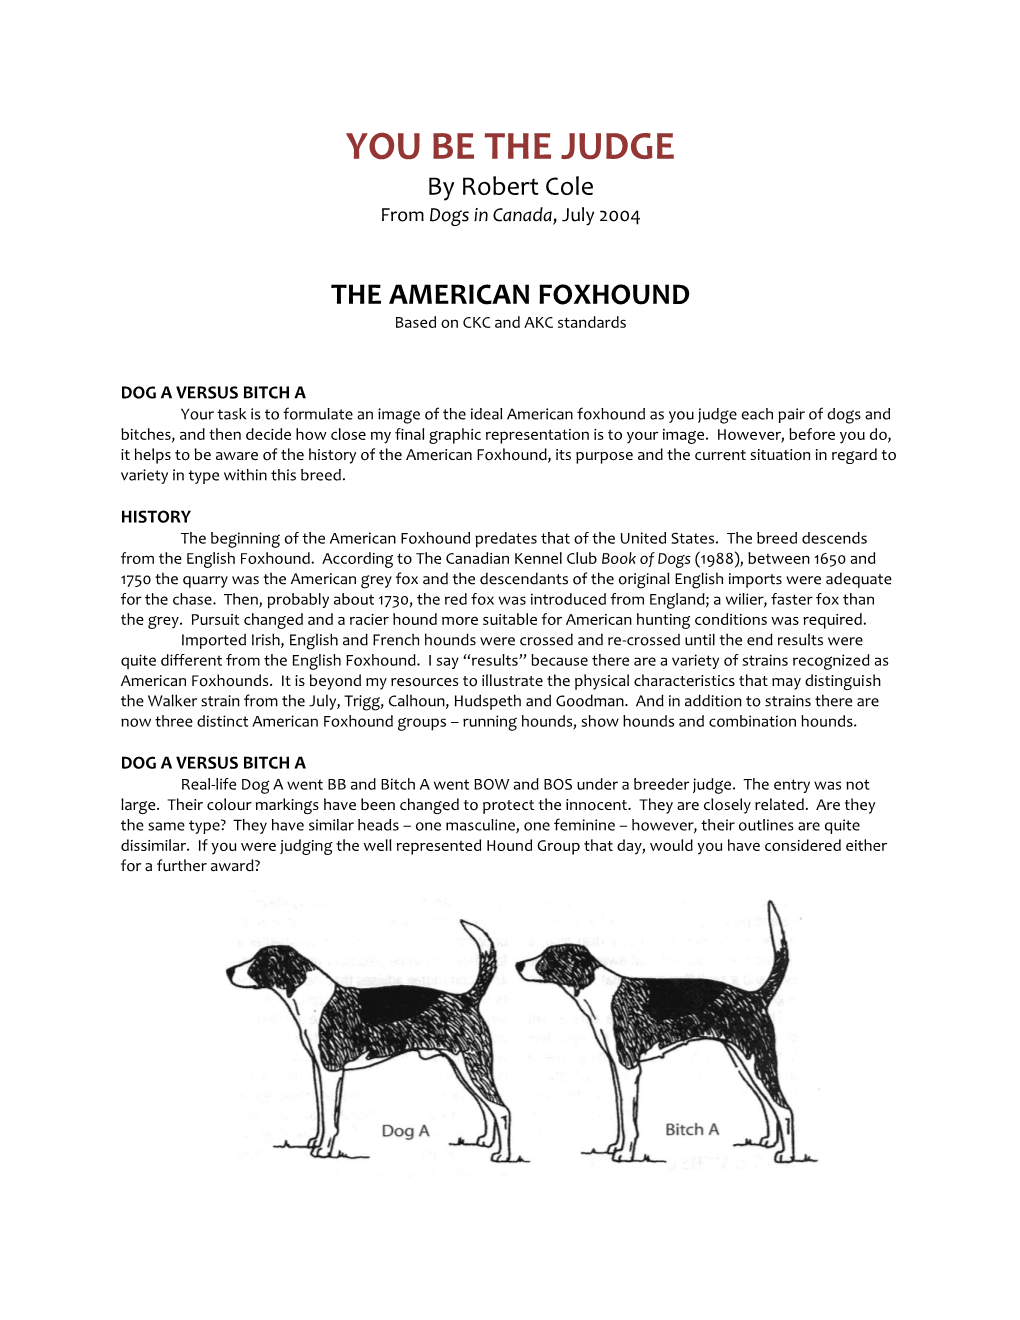 AMERICAN FOXHOUND Based on CKC and AKC Standards